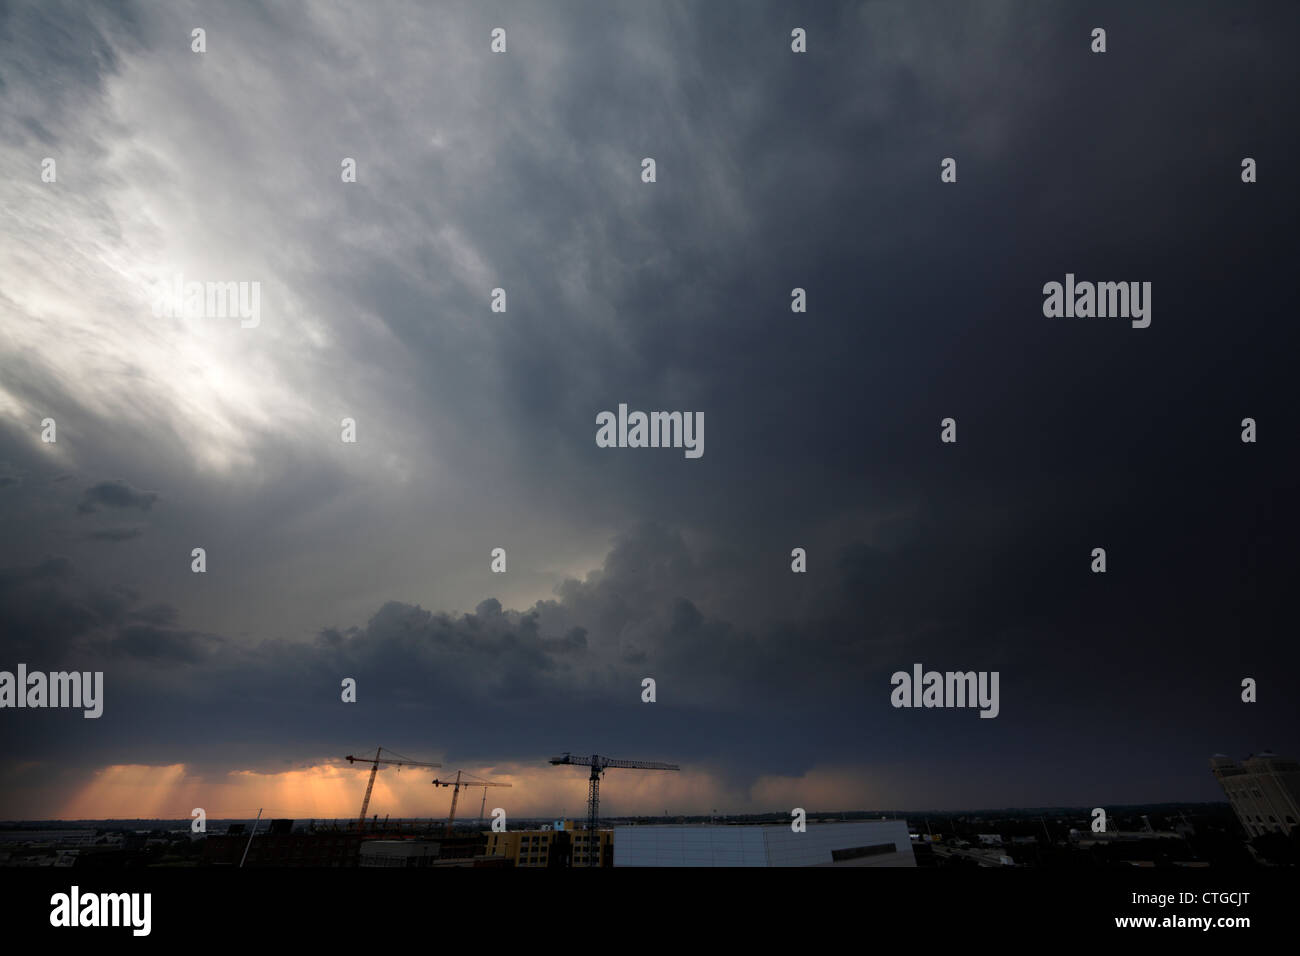 A funnel cloud lowers behind three tower cranes beyond a city. Stock Photo